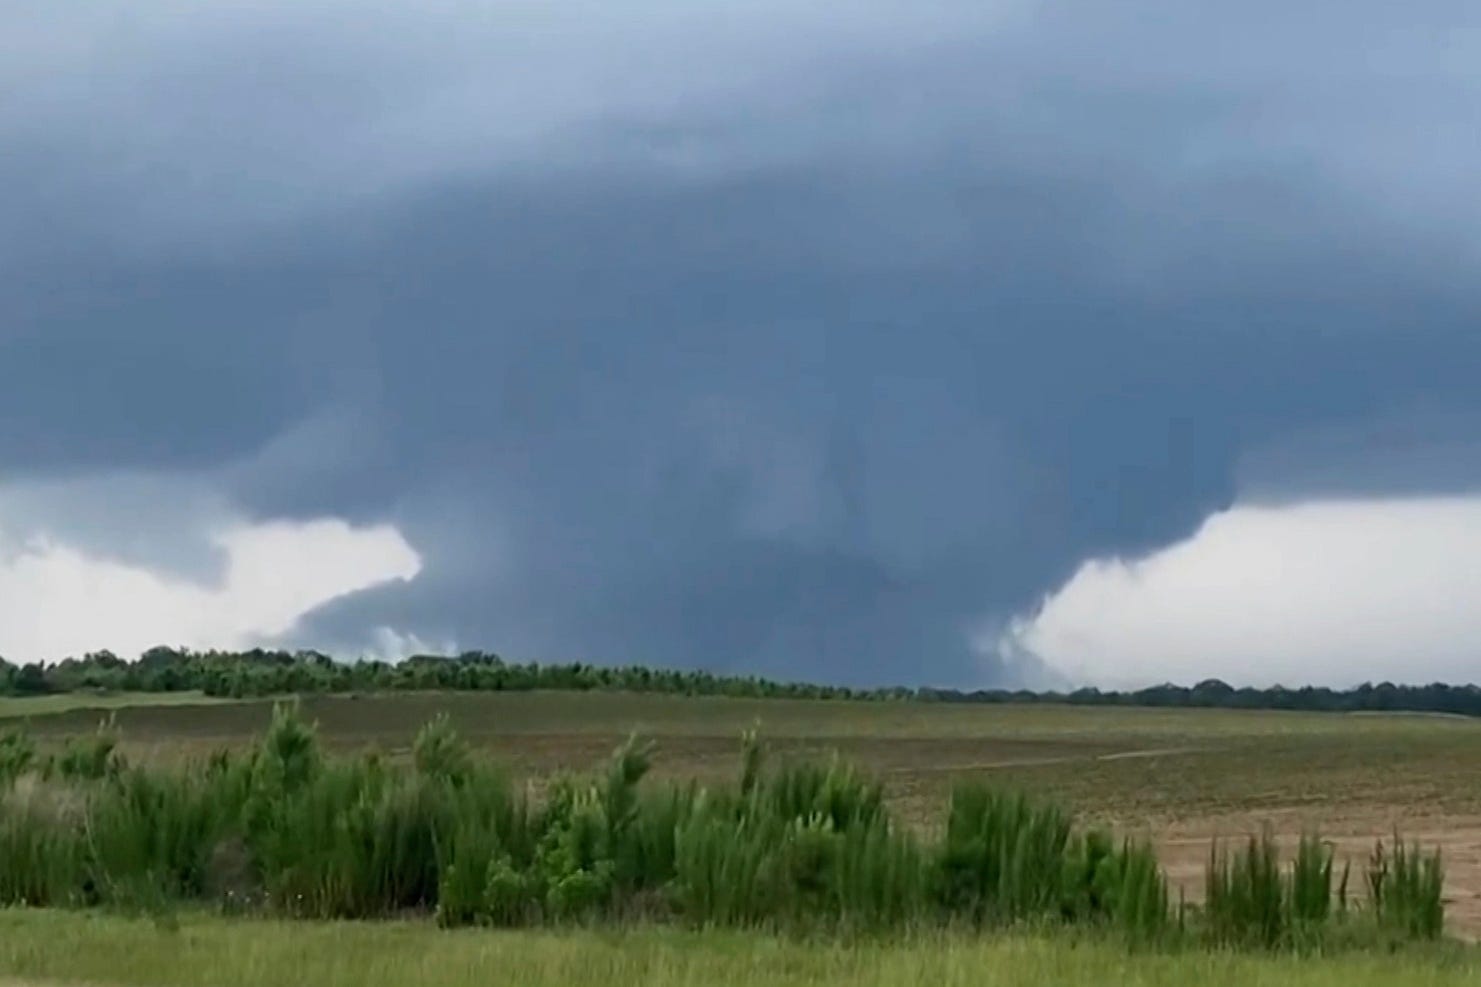 Severe storms forecast in Oklahoma, Kansas and Texas, NWS says